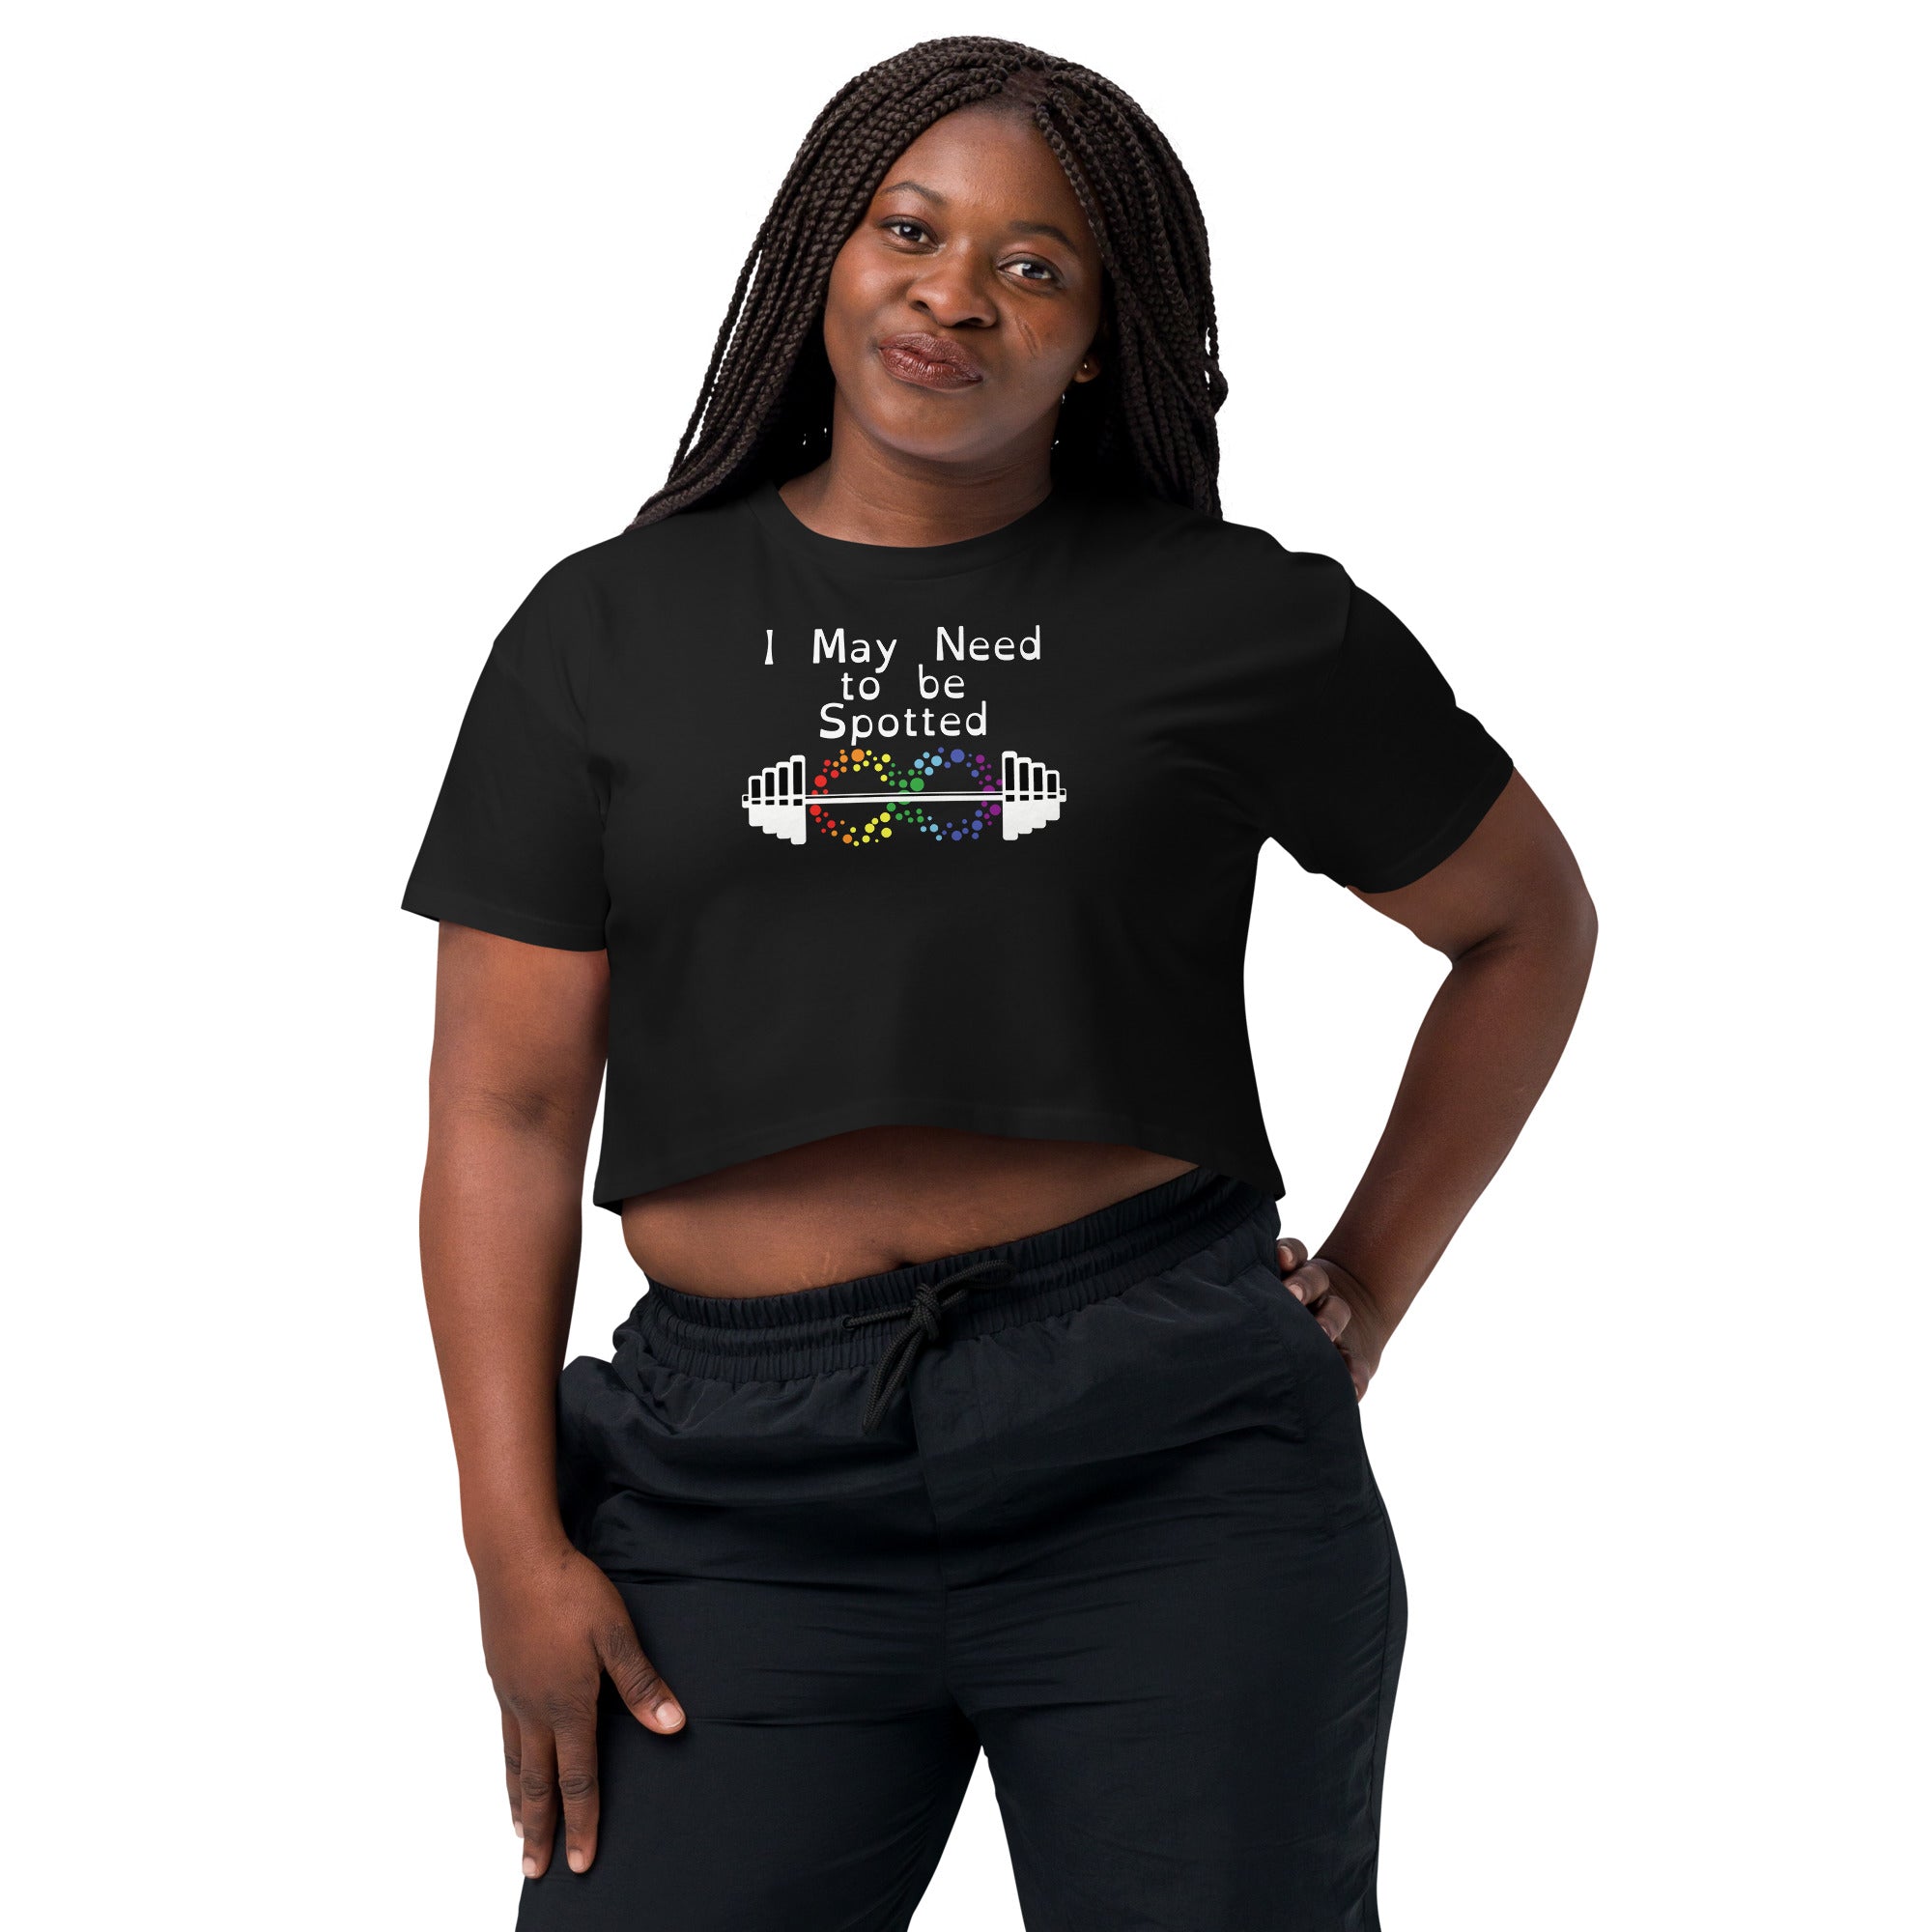 I May Need to be Spotted Women’s crop top